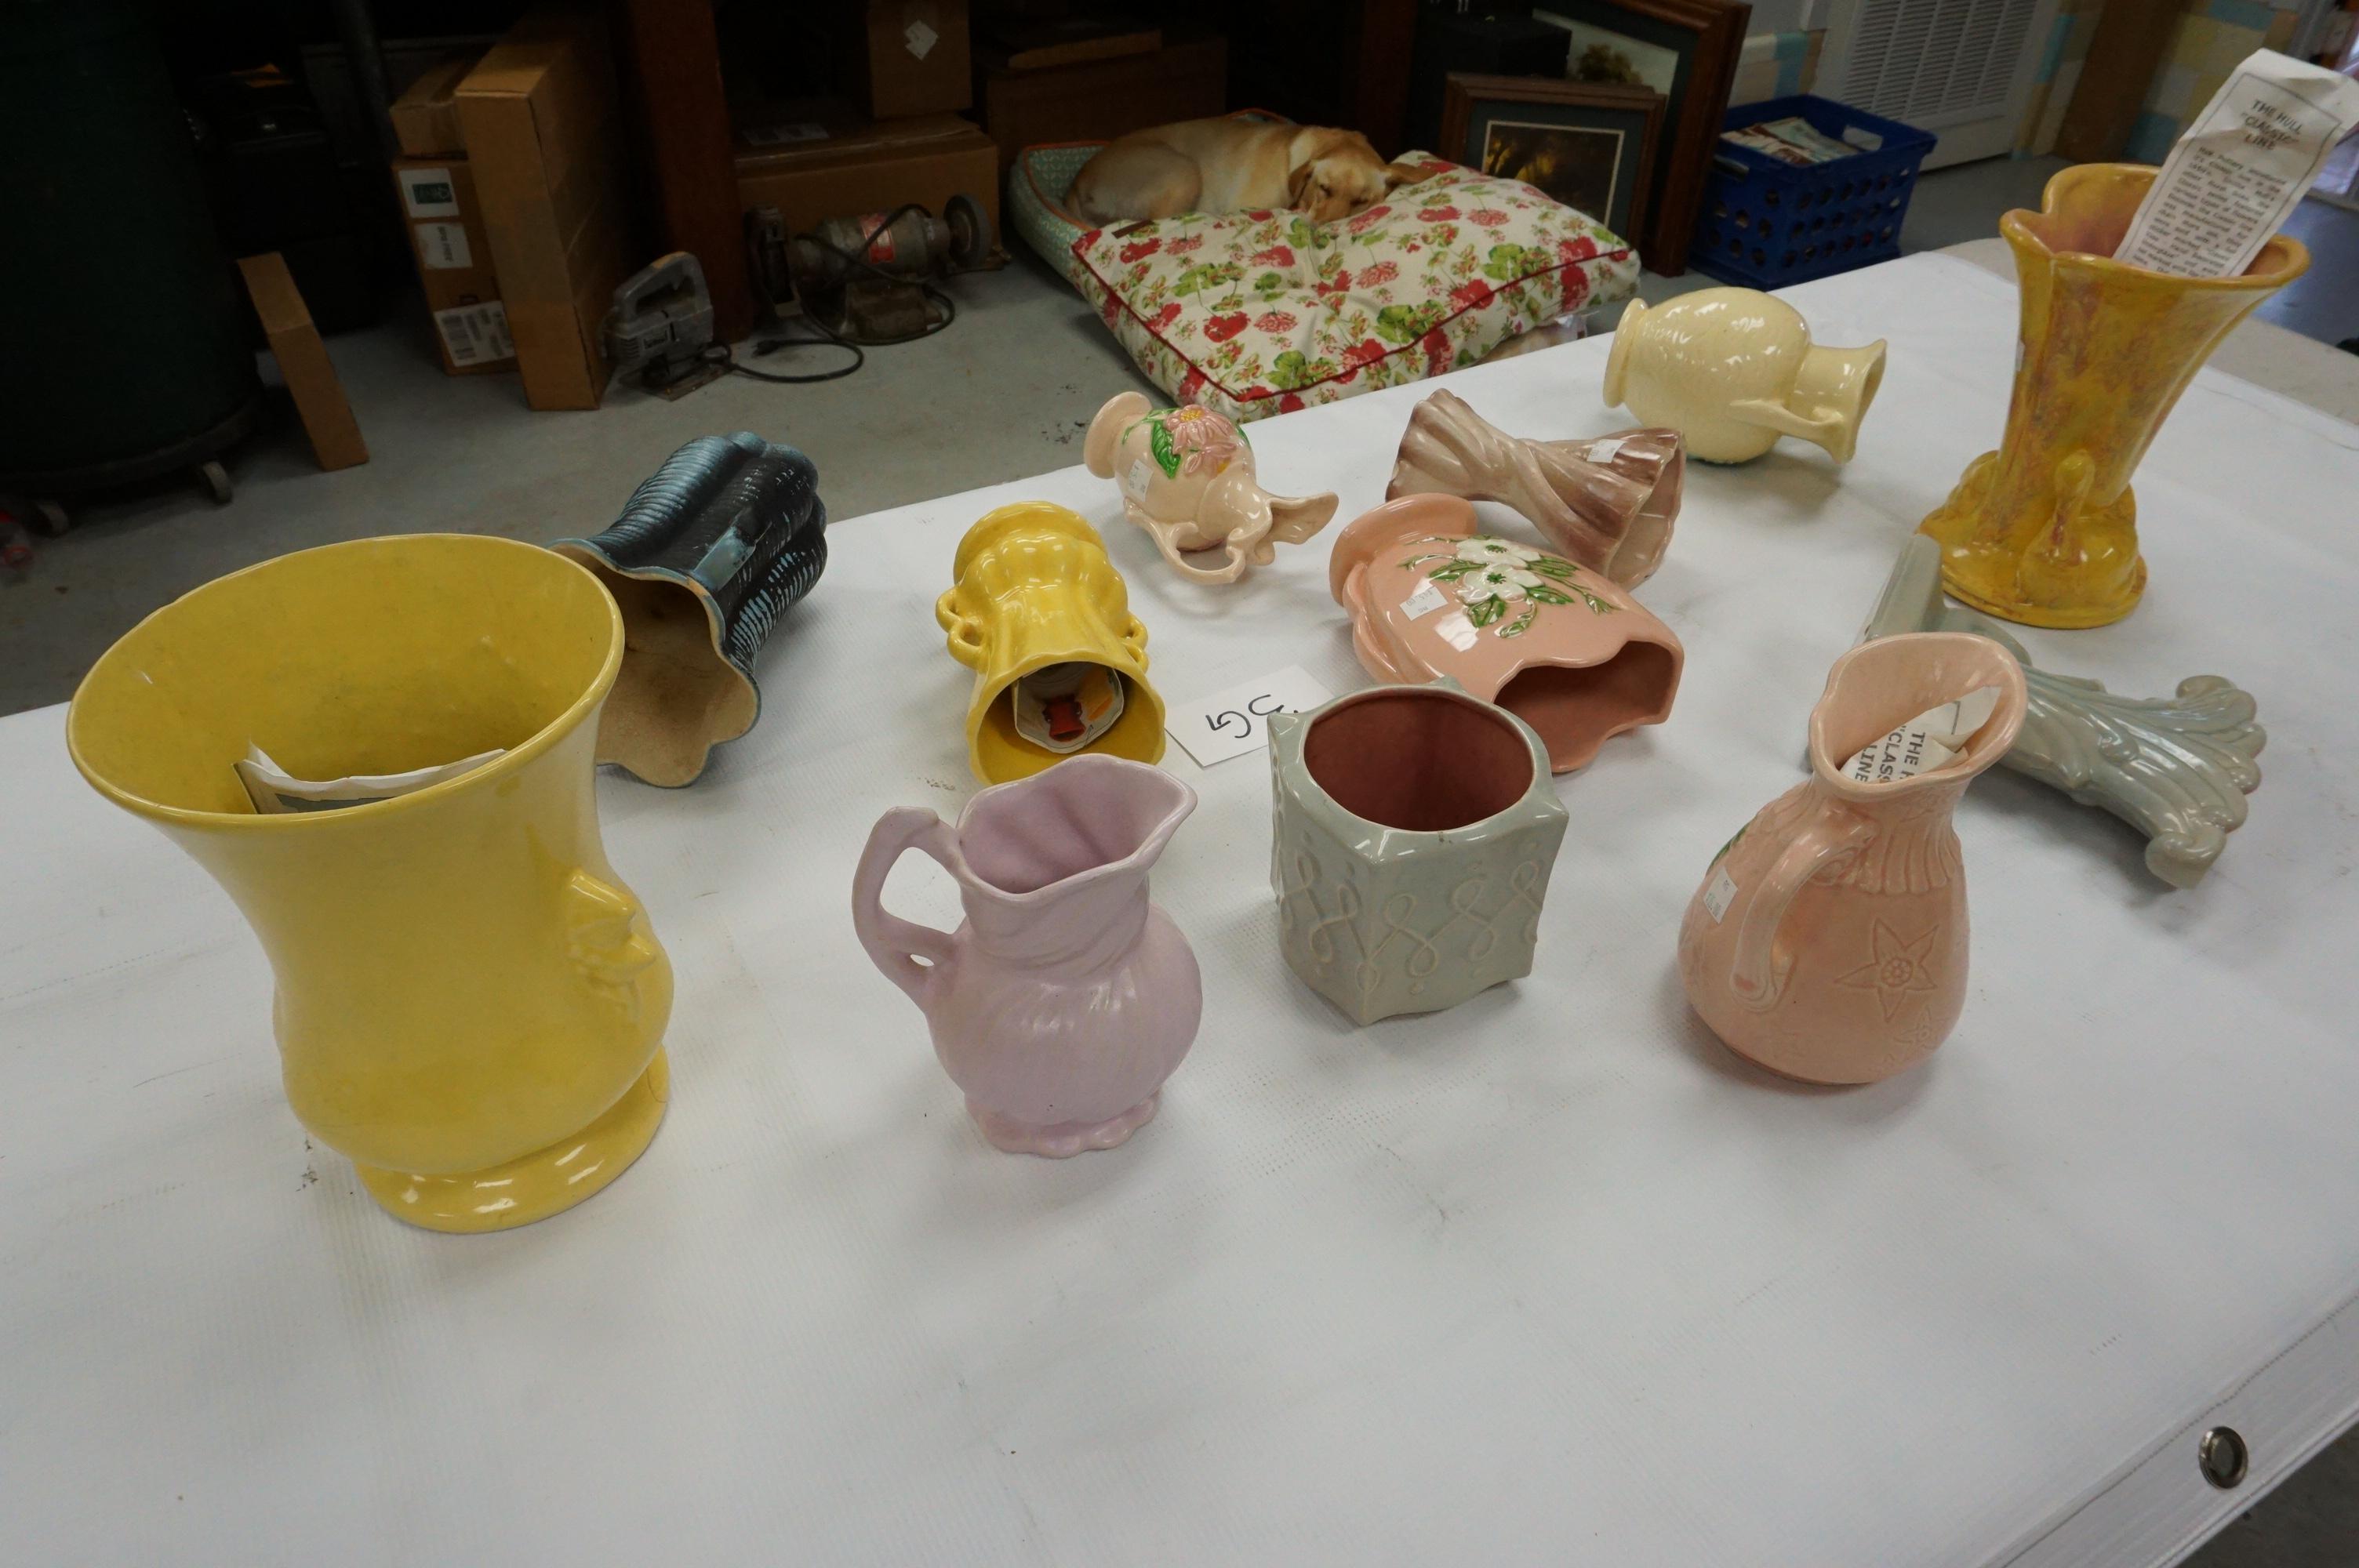 Austin, Texas Estate Find: American Art Pottery Collection, PICK-UP ONLY. Twelve (12) X The MONEY!